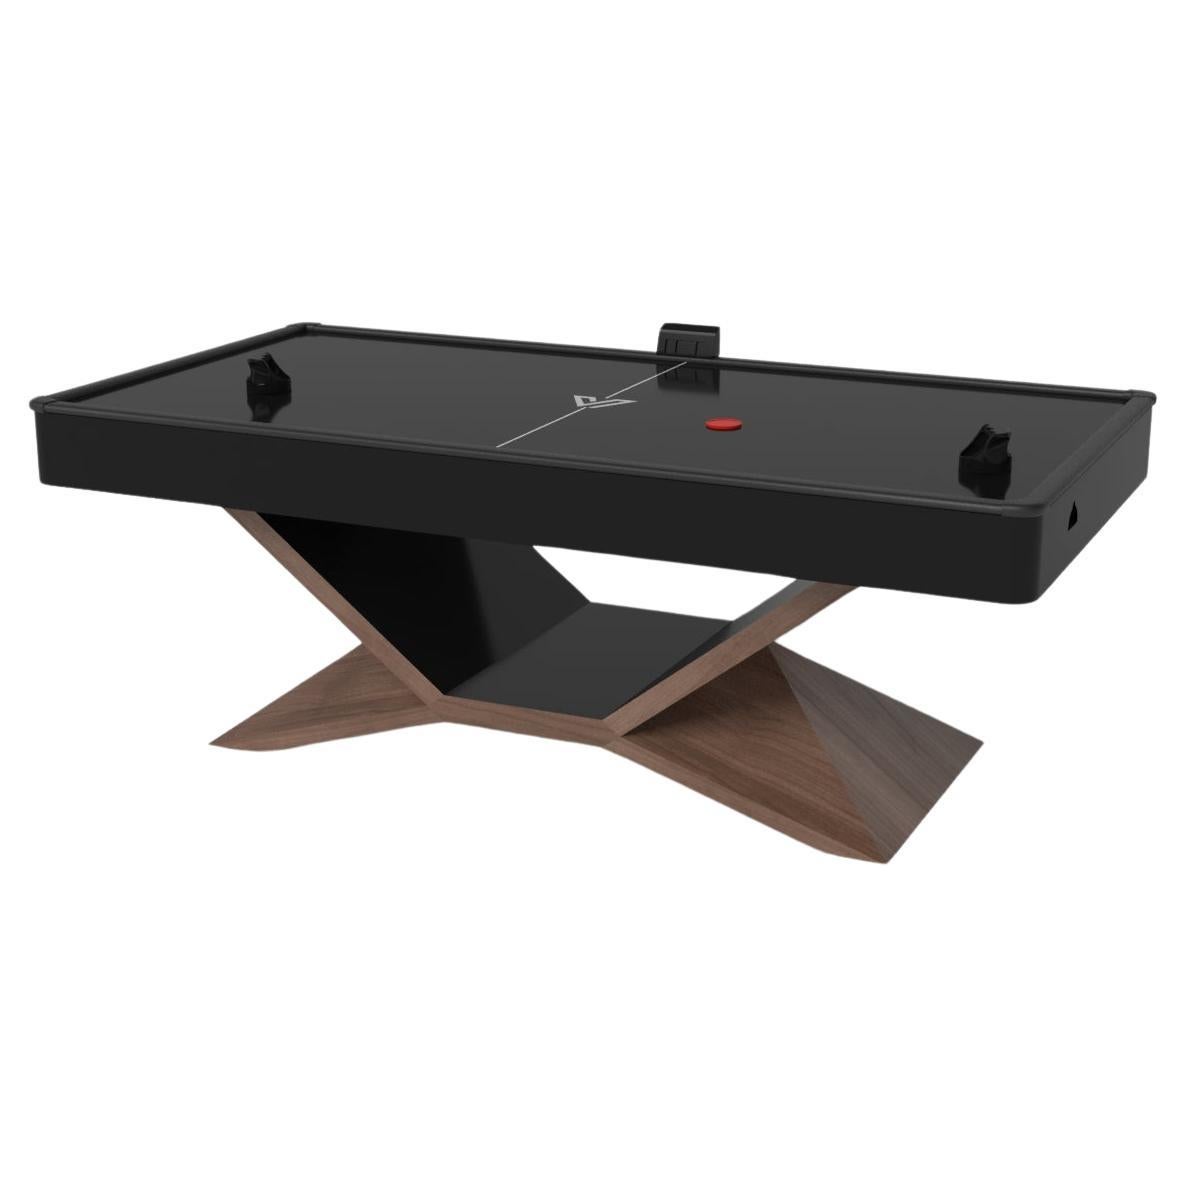 Elevate Customs Kors Air Hockey Tables / Solid Walnut Wood in 7' - Made in USA